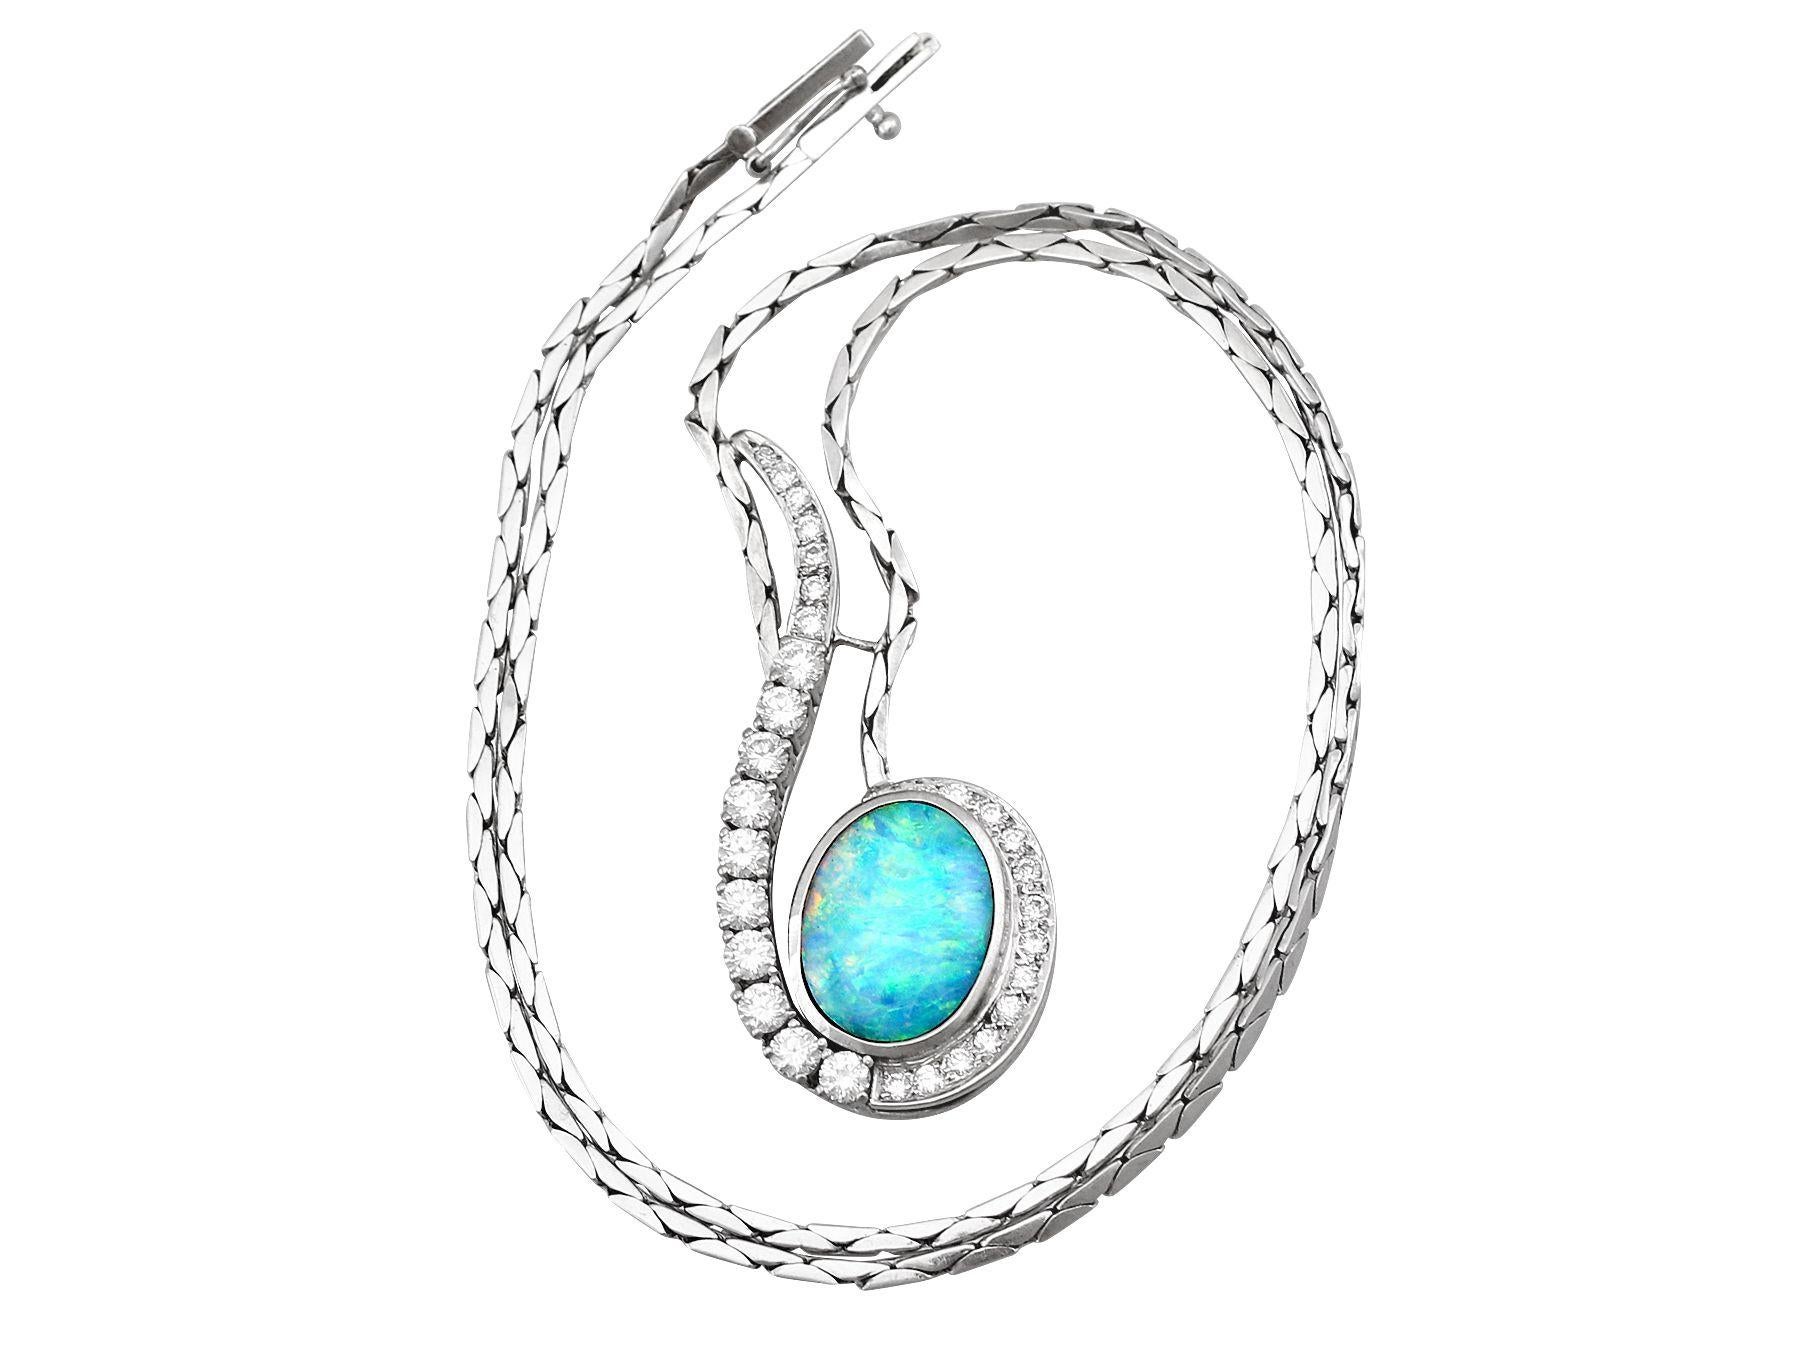 A stunning vintage 3.84 carat opal and 1.86 carat diamond, 18 and 14 karat white gold necklace; part of our diverse opal jewelry and estate jewelry collections.

This stunning, fine and impressive vintage cabochon cut opal pendant has been crafted